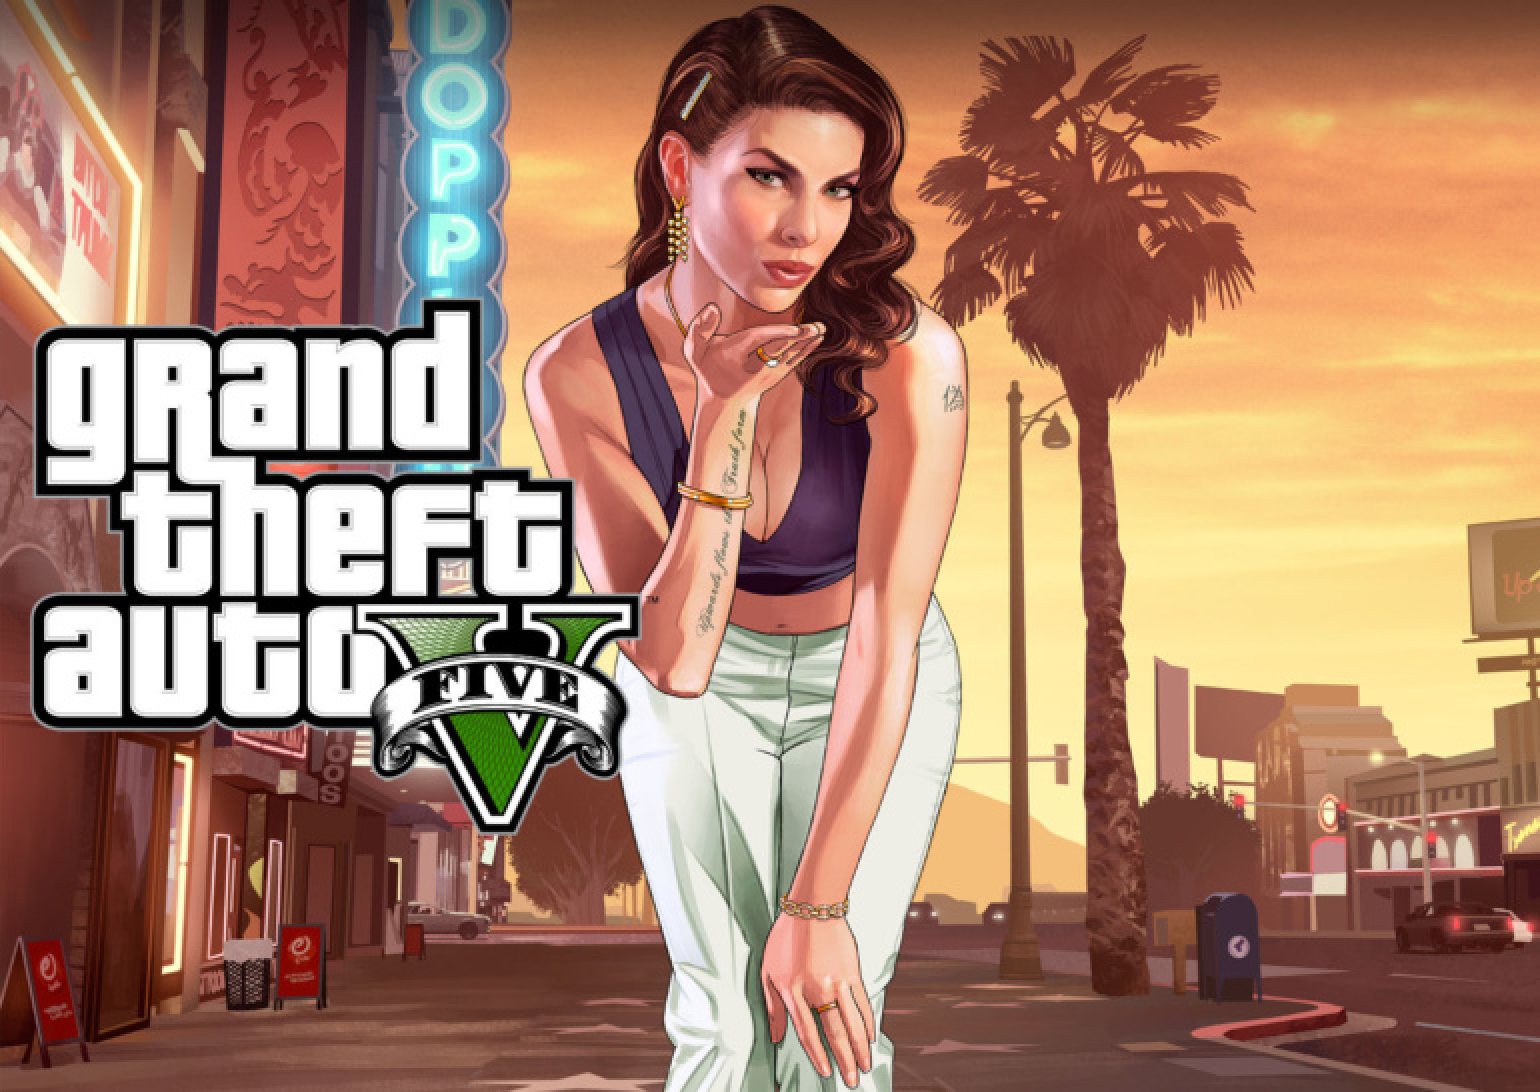 GTA 5 became the third best-selling game in the world after Tetris and Minecraft - 200 million copies in 11 years